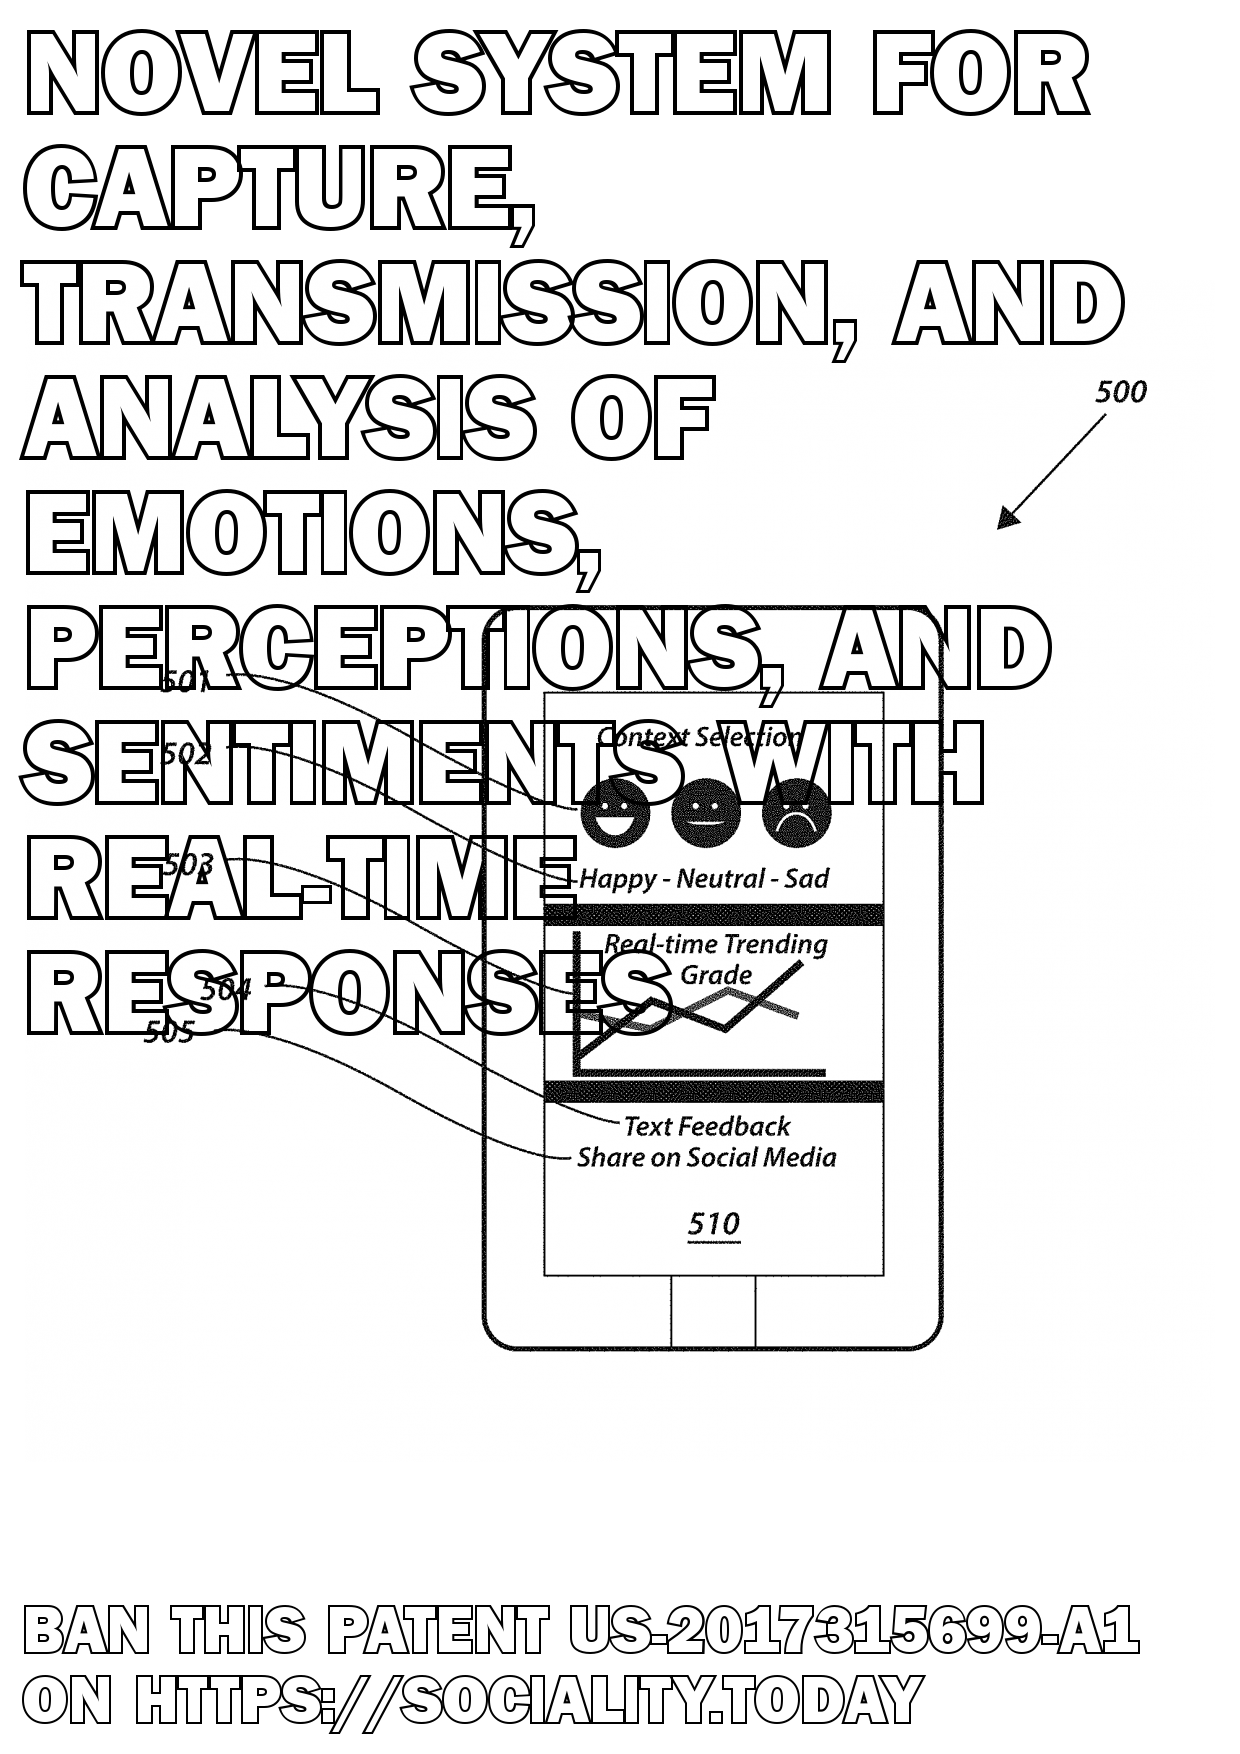 Novel system for capture, transmission, and analysis of emotions, perceptions, and sentiments with real-time responses  - US-2017315699-A1